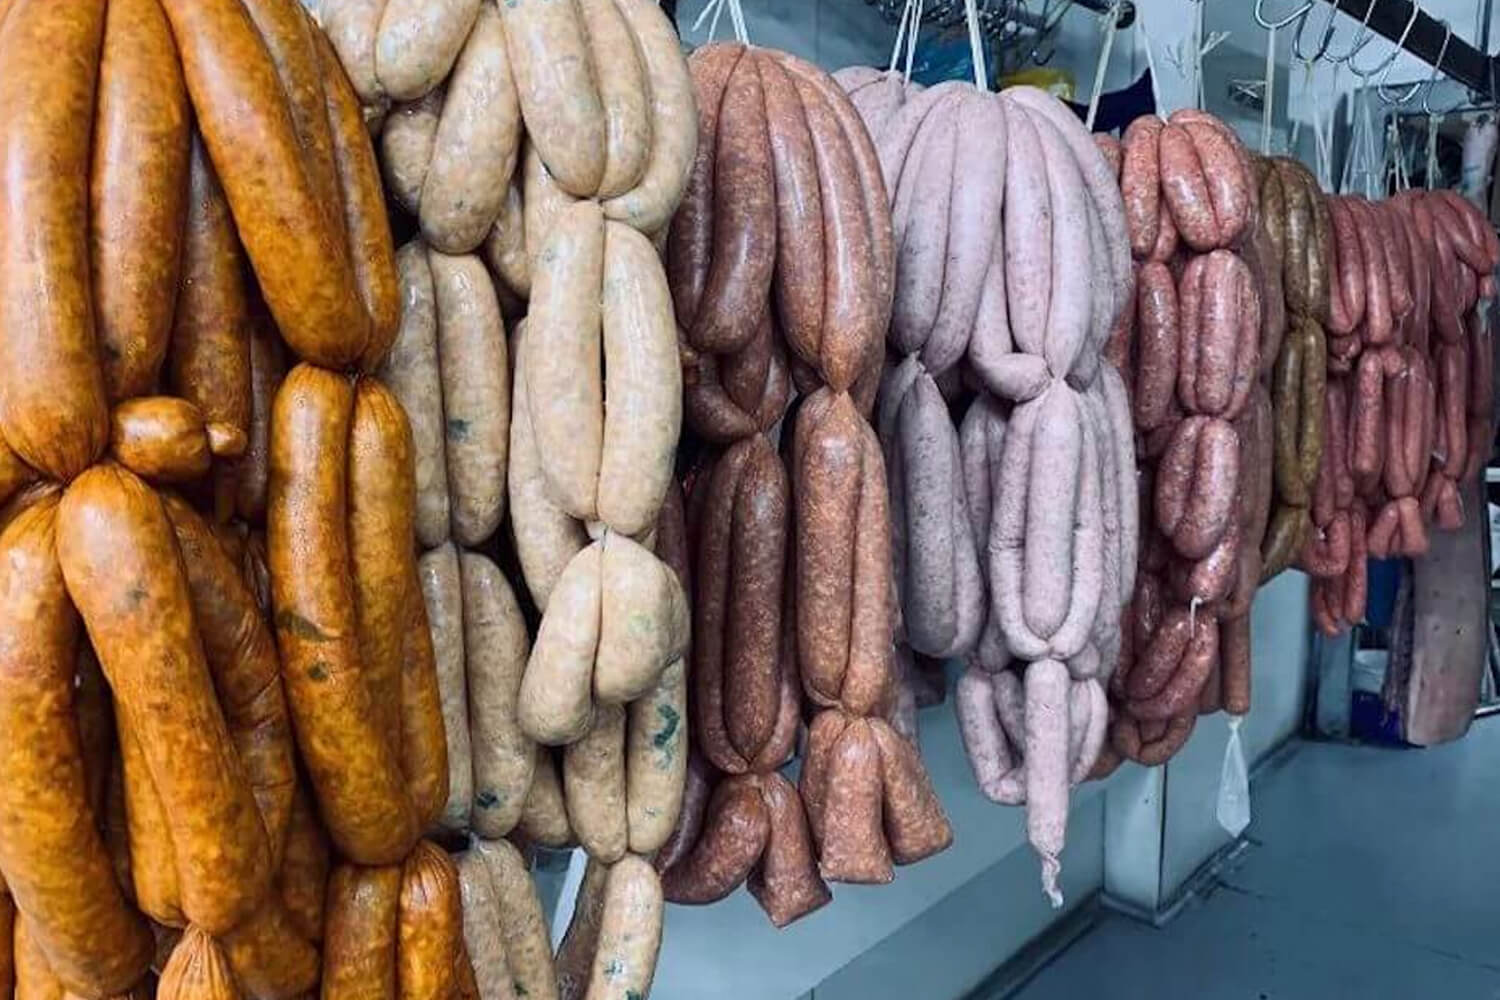 Sausages, small goods